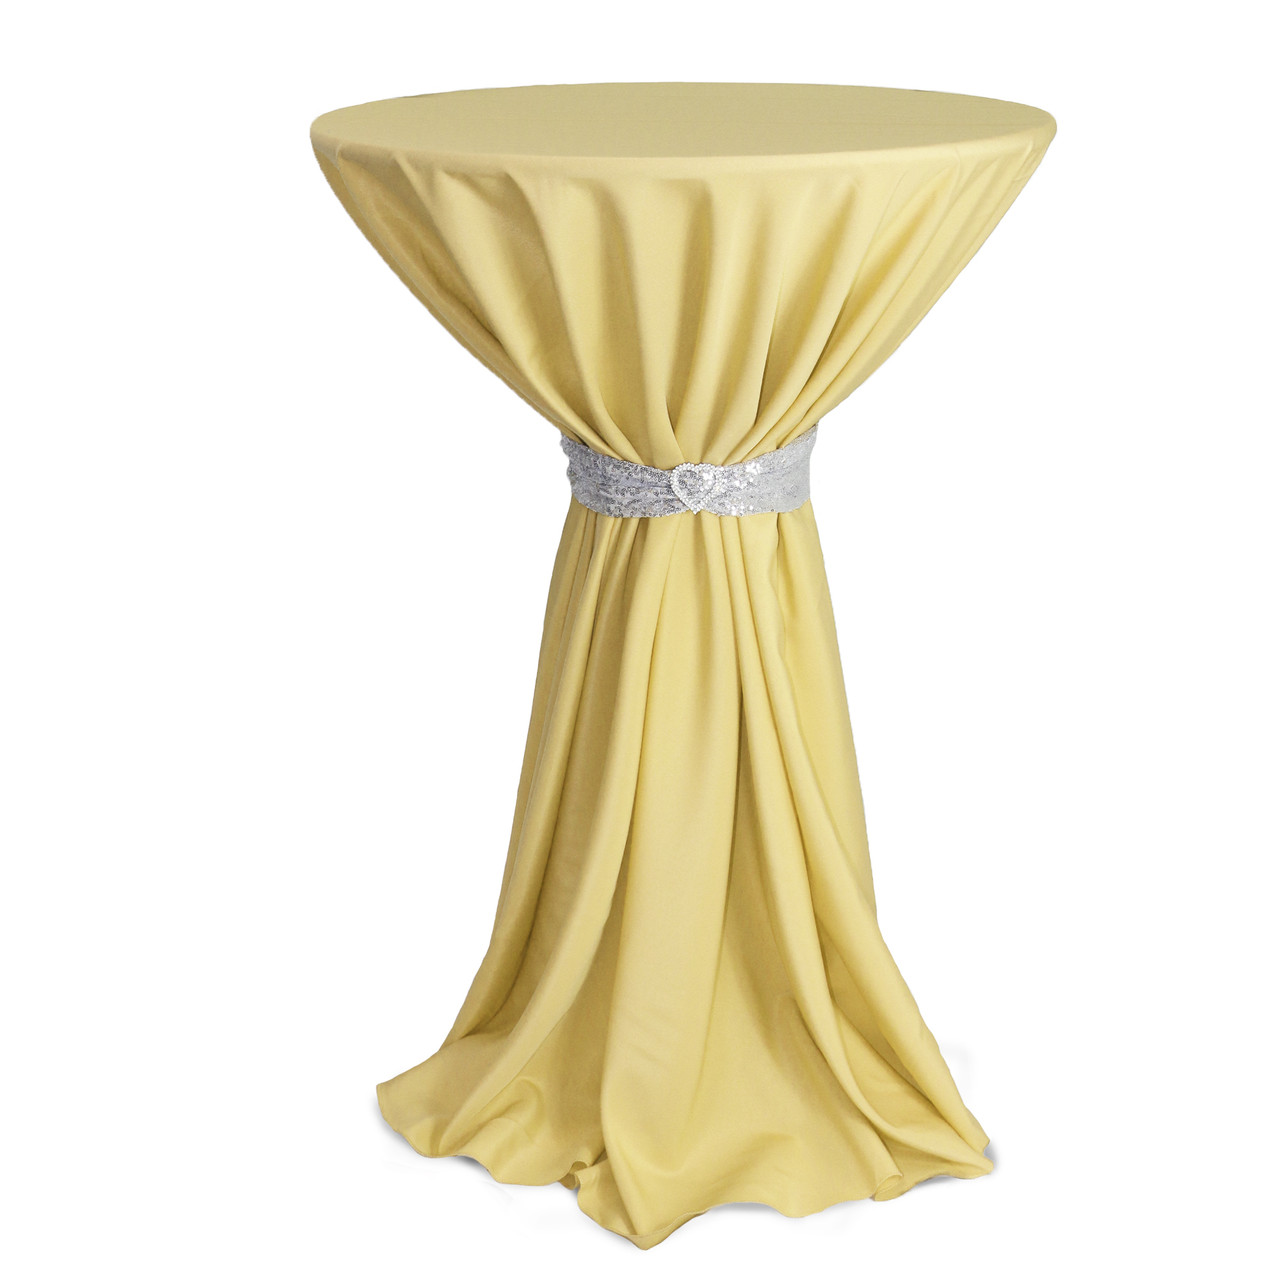 https://cdn11.bigcommerce.com/s-bch7e9/images/stencil/1280x1280/products/960/10702/108-inch-round-polyester-tablecloth-py-on-cocktail__08255.1631114906.jpg?c=2